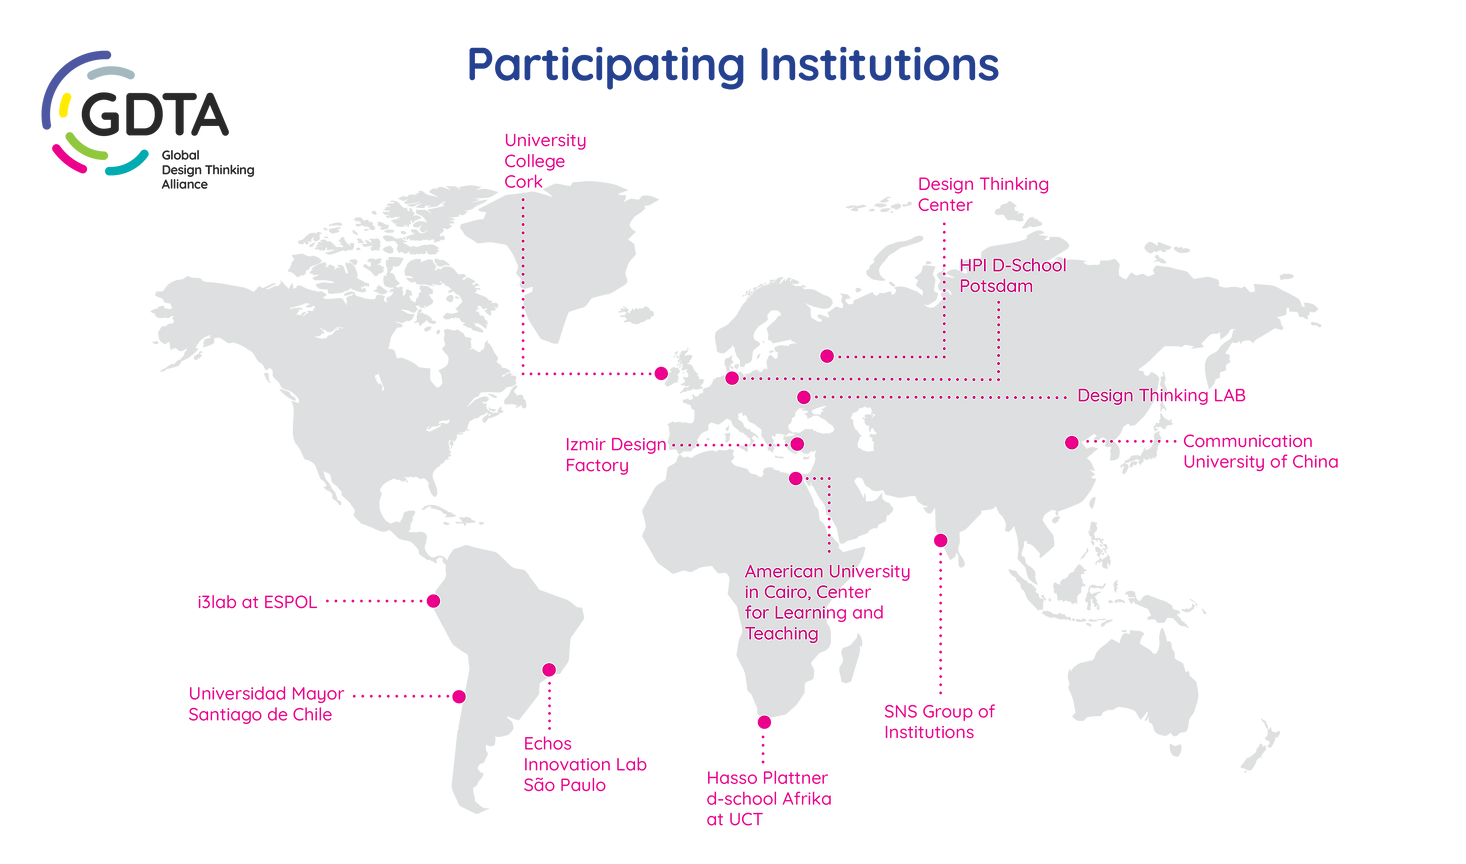 GDTC Participating Institutions